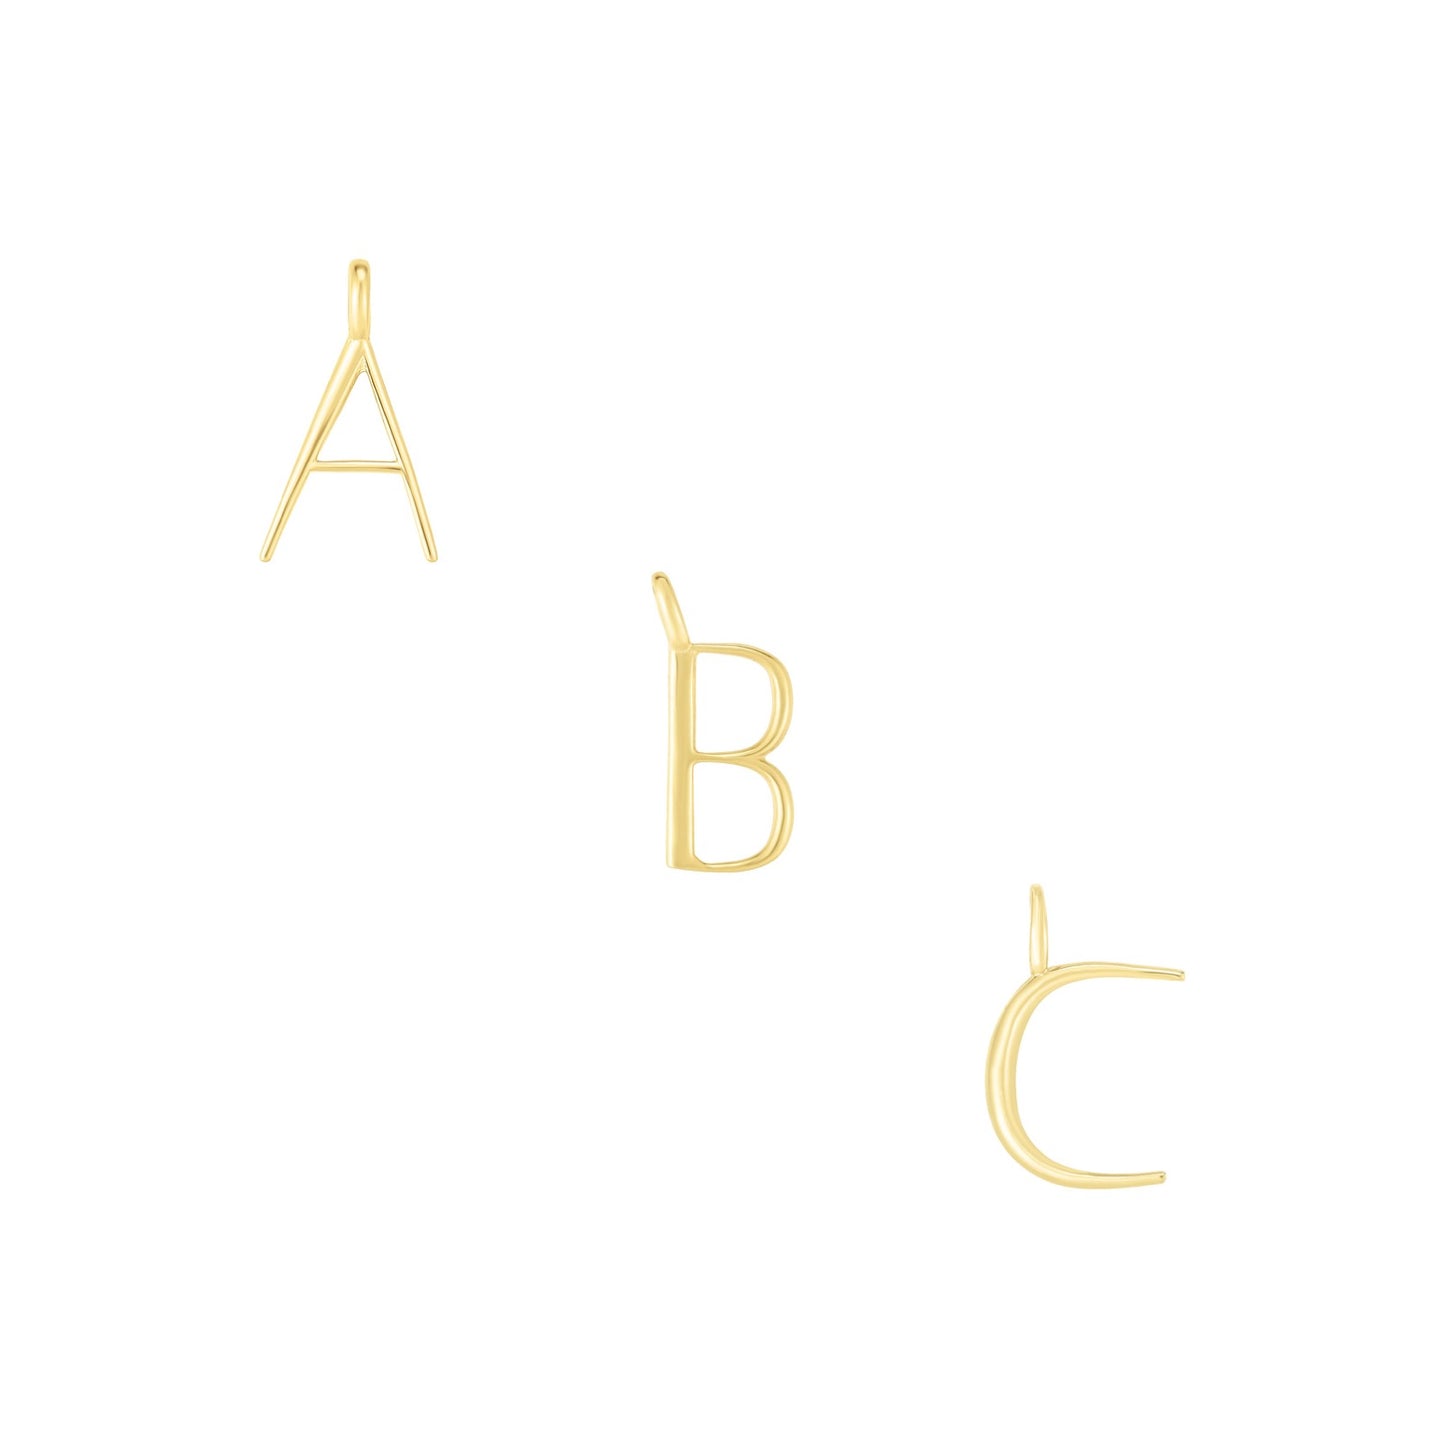 14K yellow gold A, B, and C letter charms.